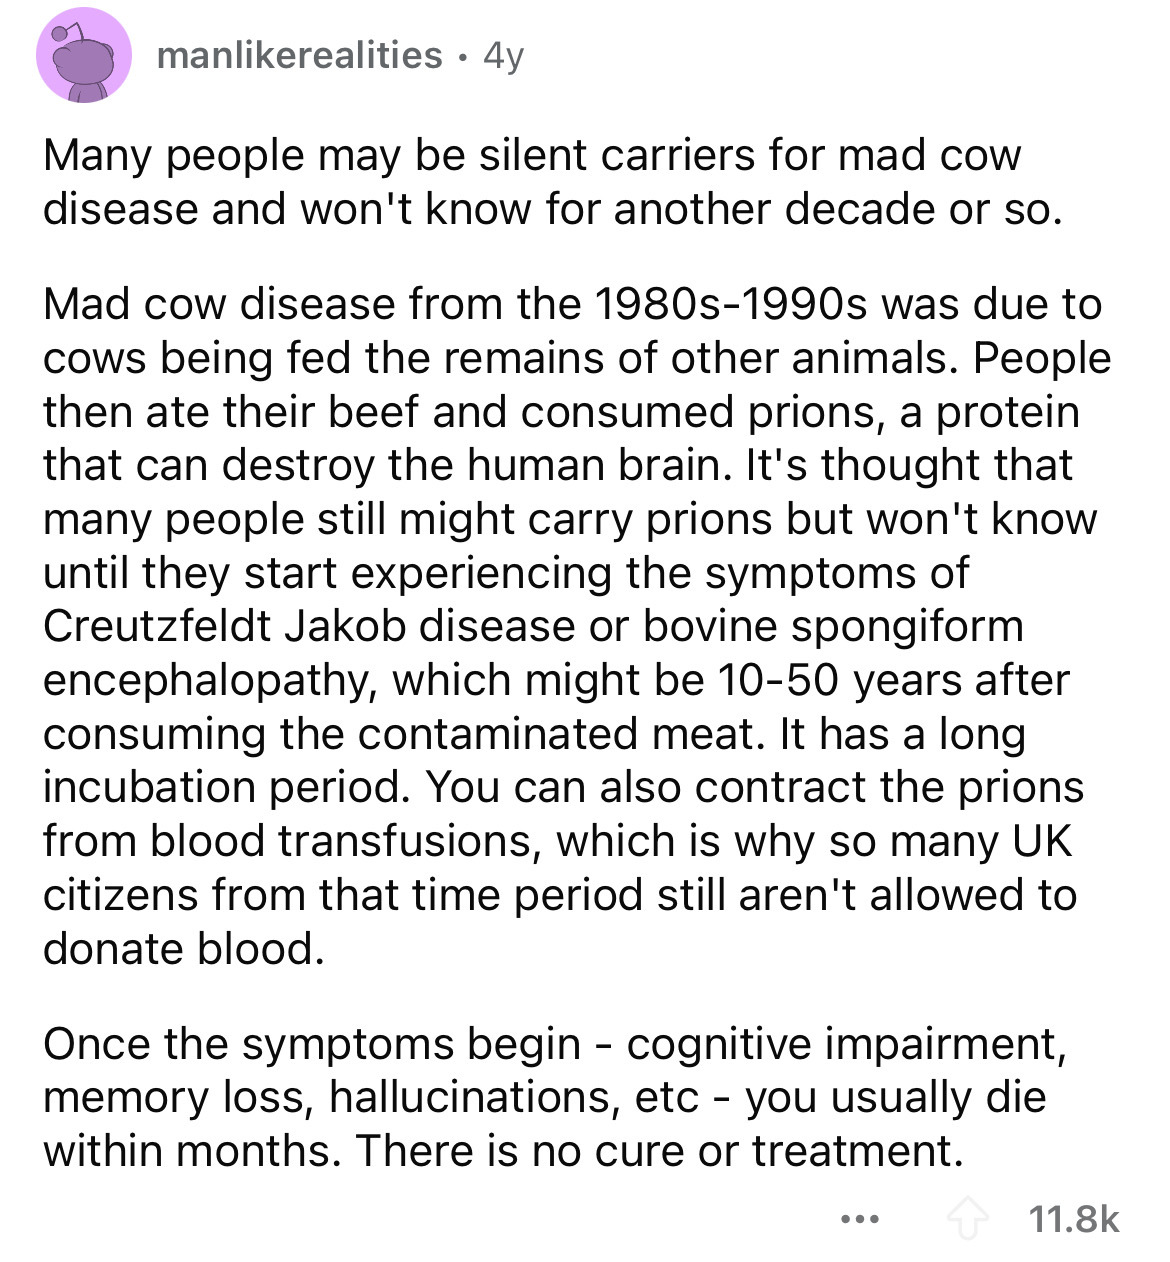 document - manrealities 4y Many people may be silent carriers for mad cow disease and won't know for another decade or so. Mad cow disease from the 1980s1990s was due to cows being fed the remains of other animals. People then ate their beef and consumed 